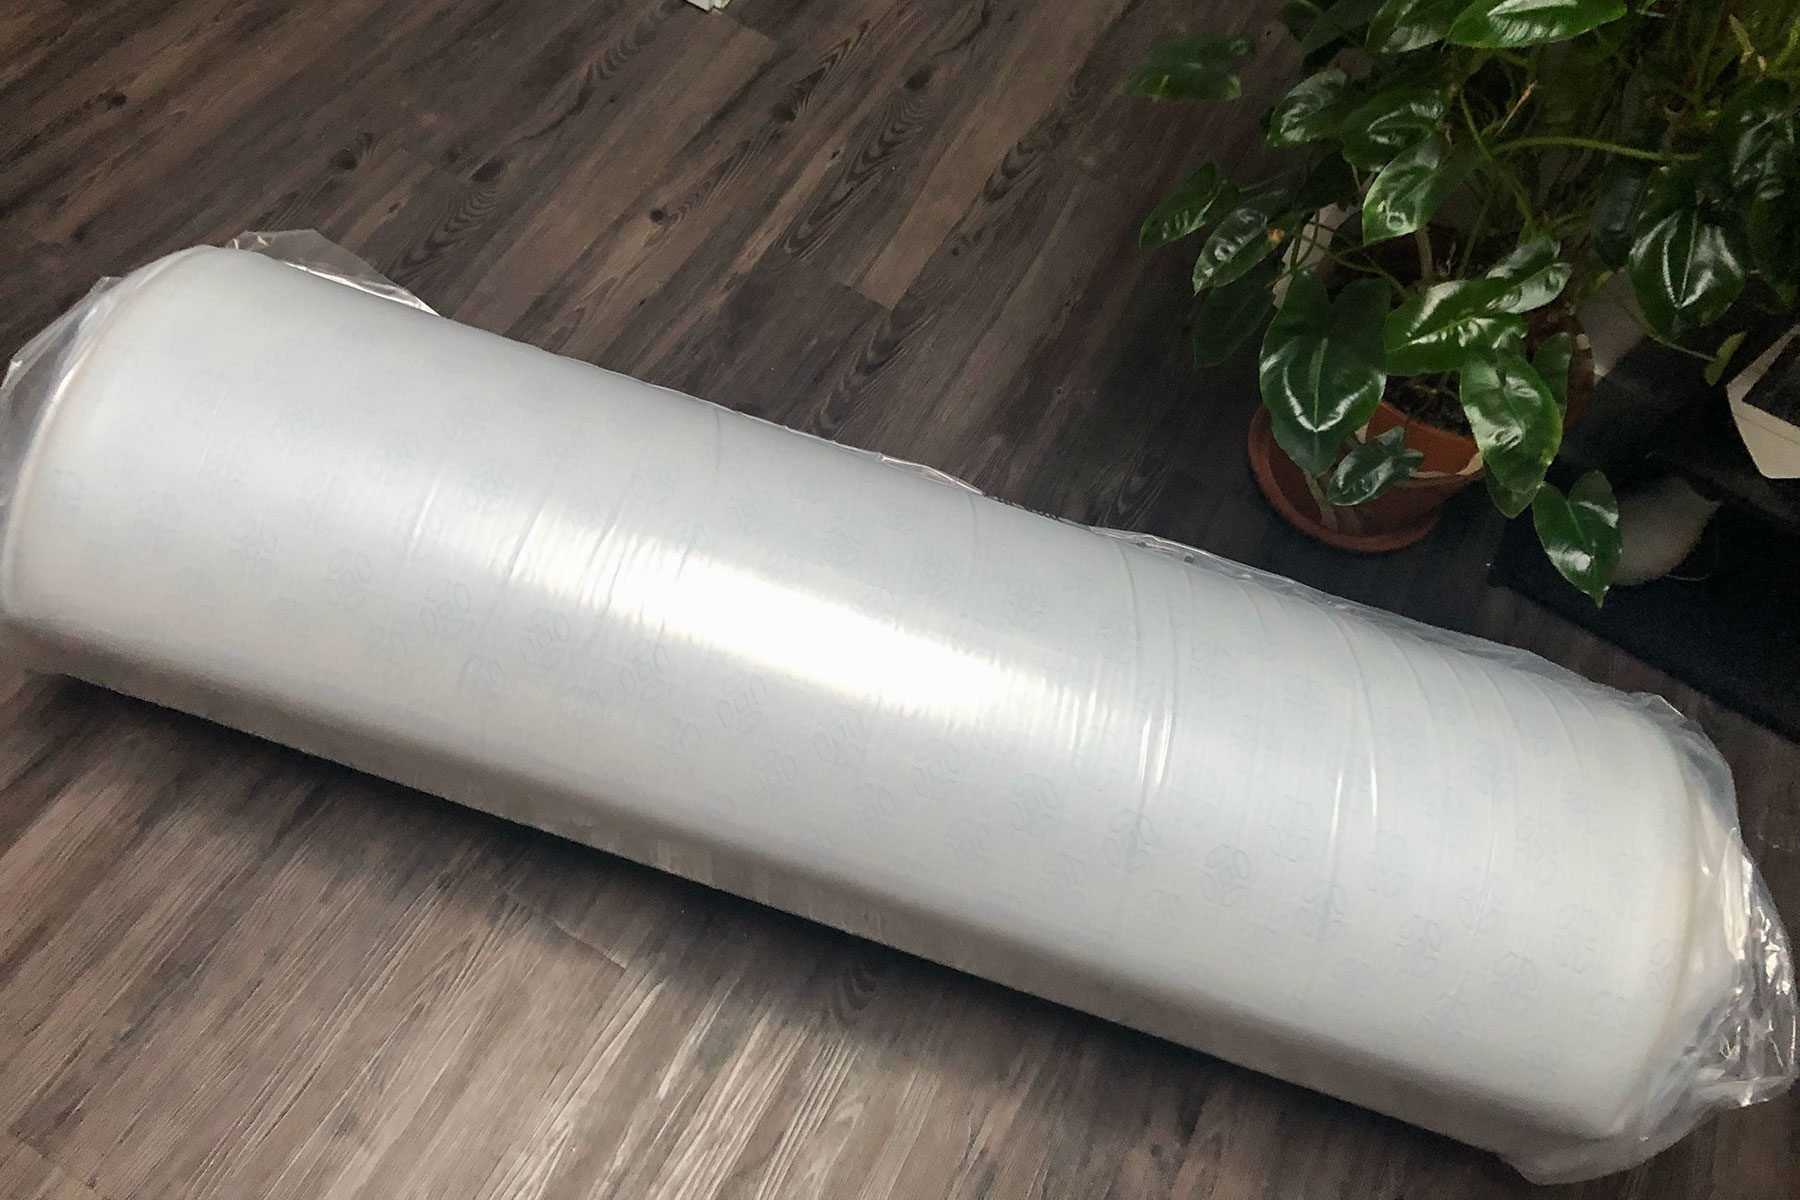 A roll of plastic wrap sitting on a wooden floor.